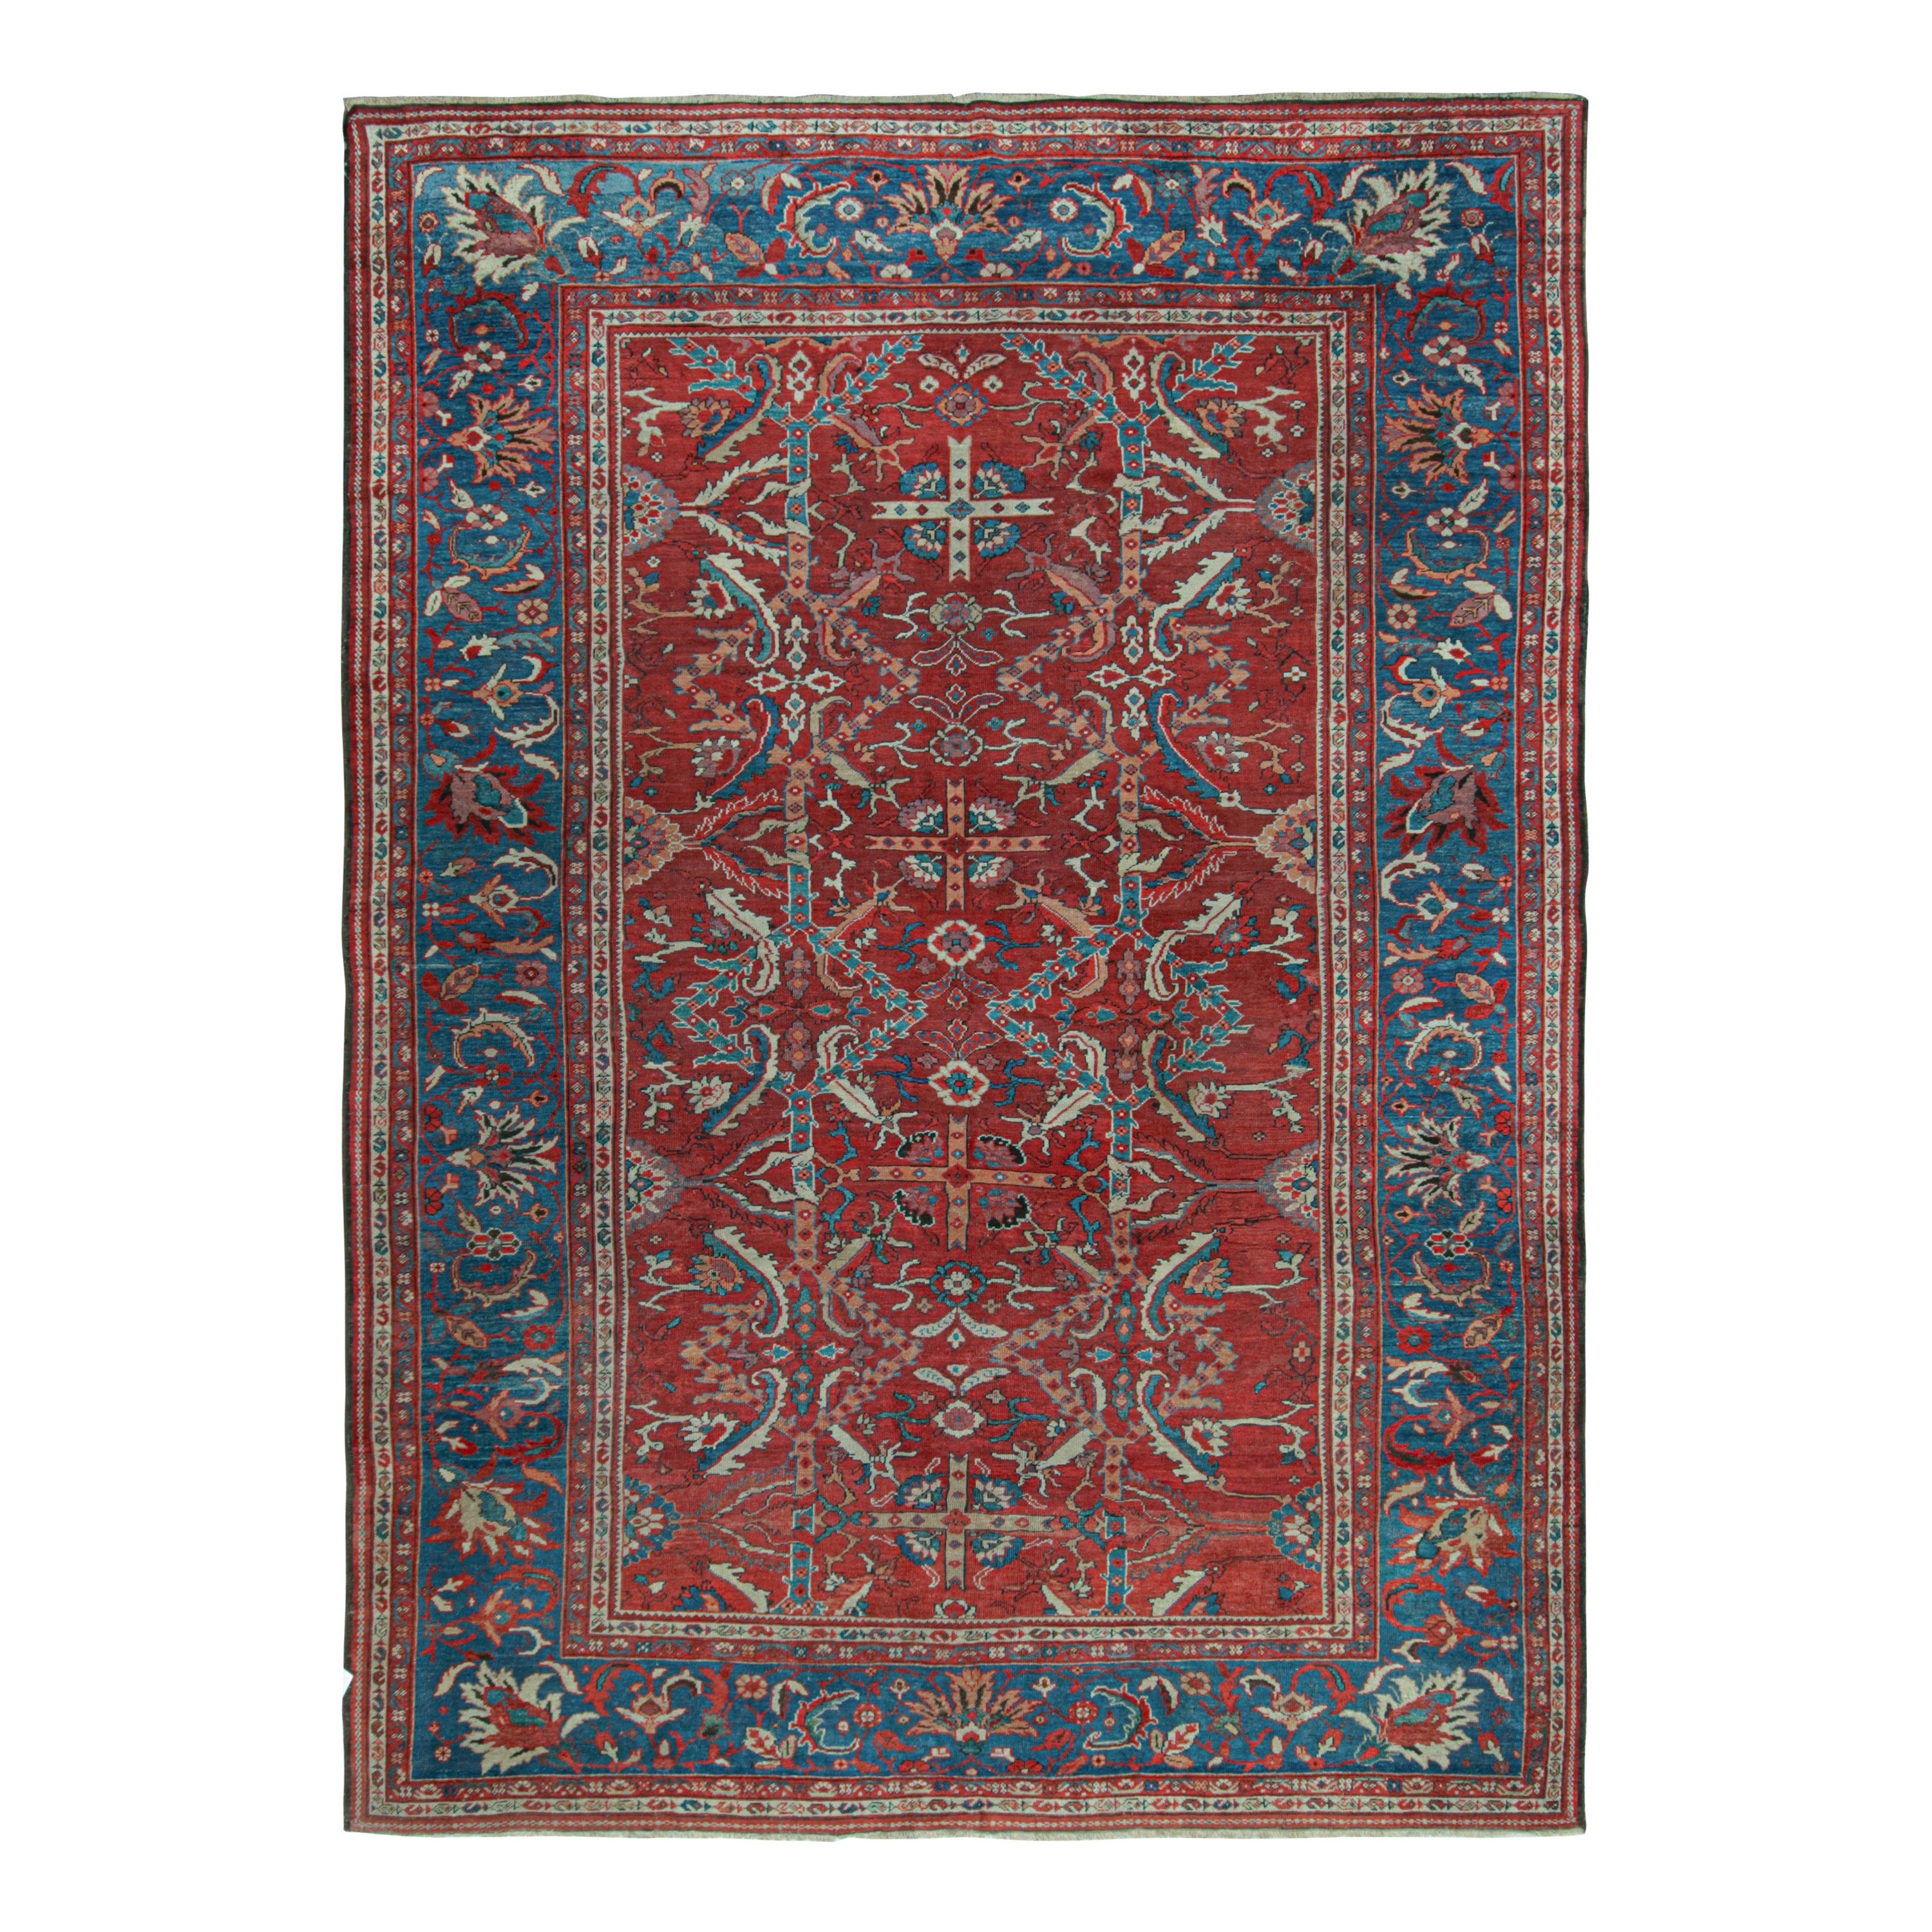 Antique Persian Sultanabad Rug with Red-Blue Floral Patterns, from Rug & Kilim